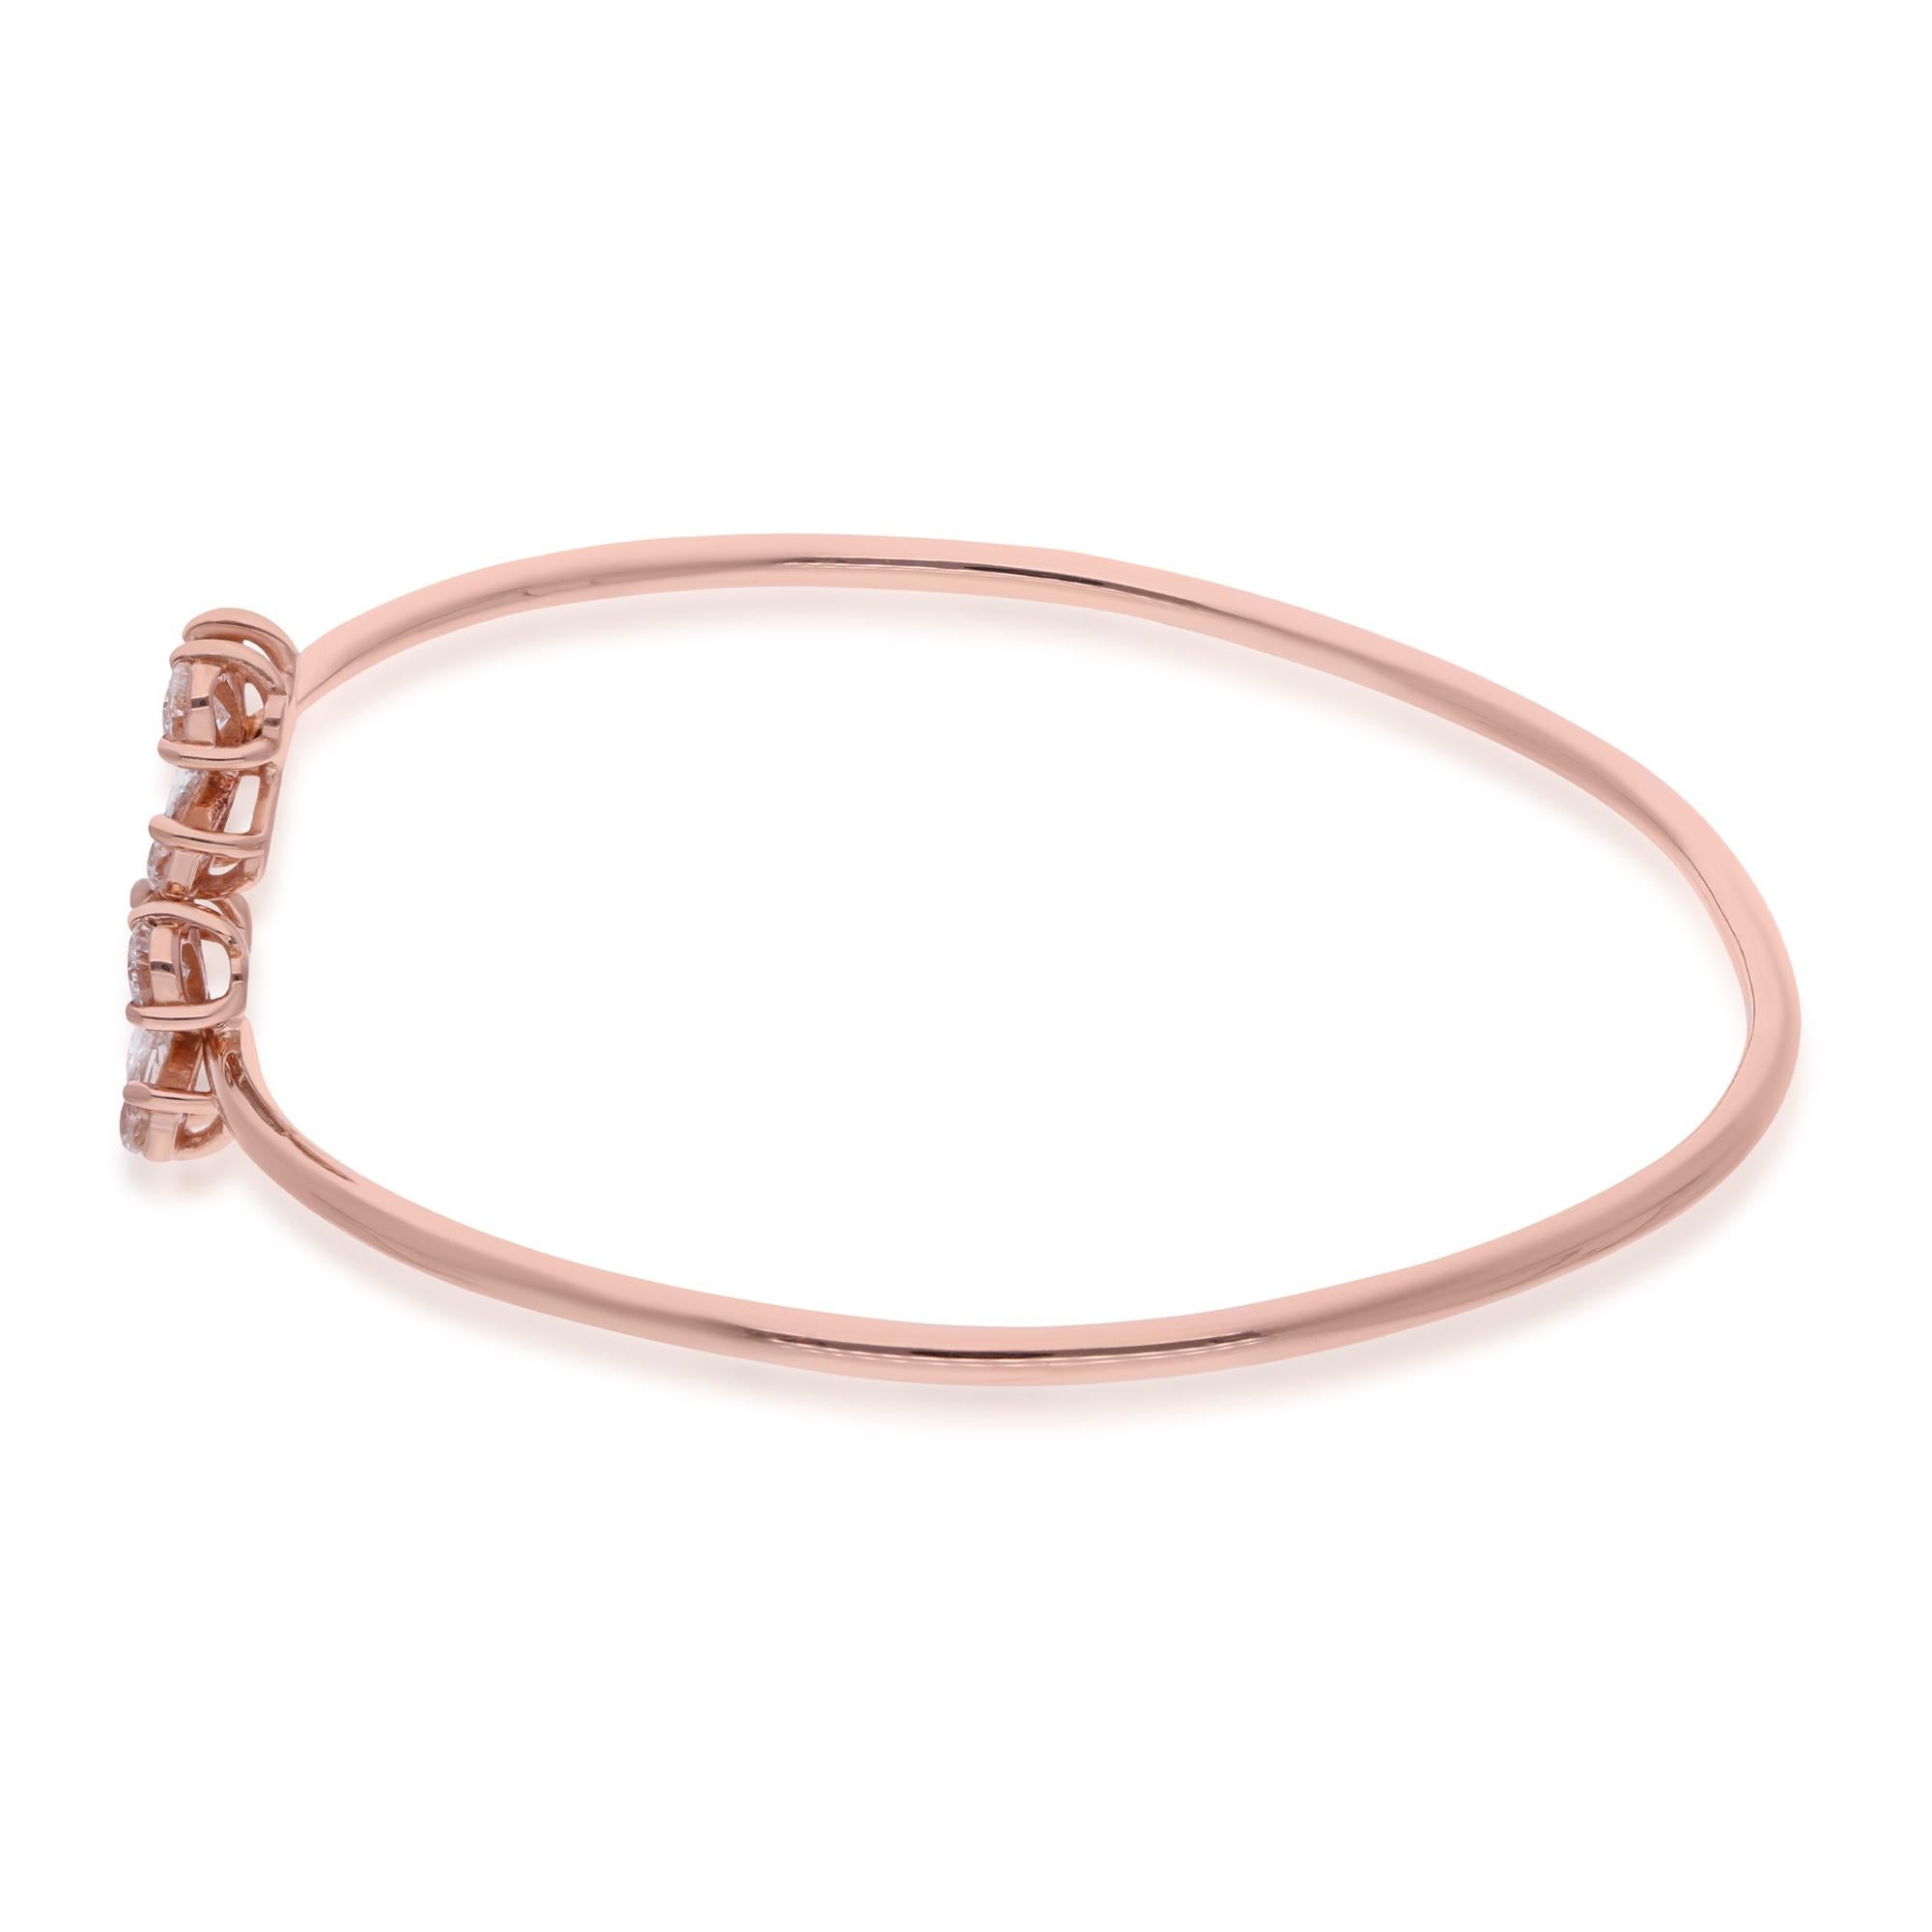 Embrace the timeless allure of elegance with this exquisite Natural 1.32 Carat Pear Shape Diamond Bangle Bracelet, gracefully crafted in luxurious 18 karat rose gold. Every facet of this bracelet is meticulously designed to capture the essence of